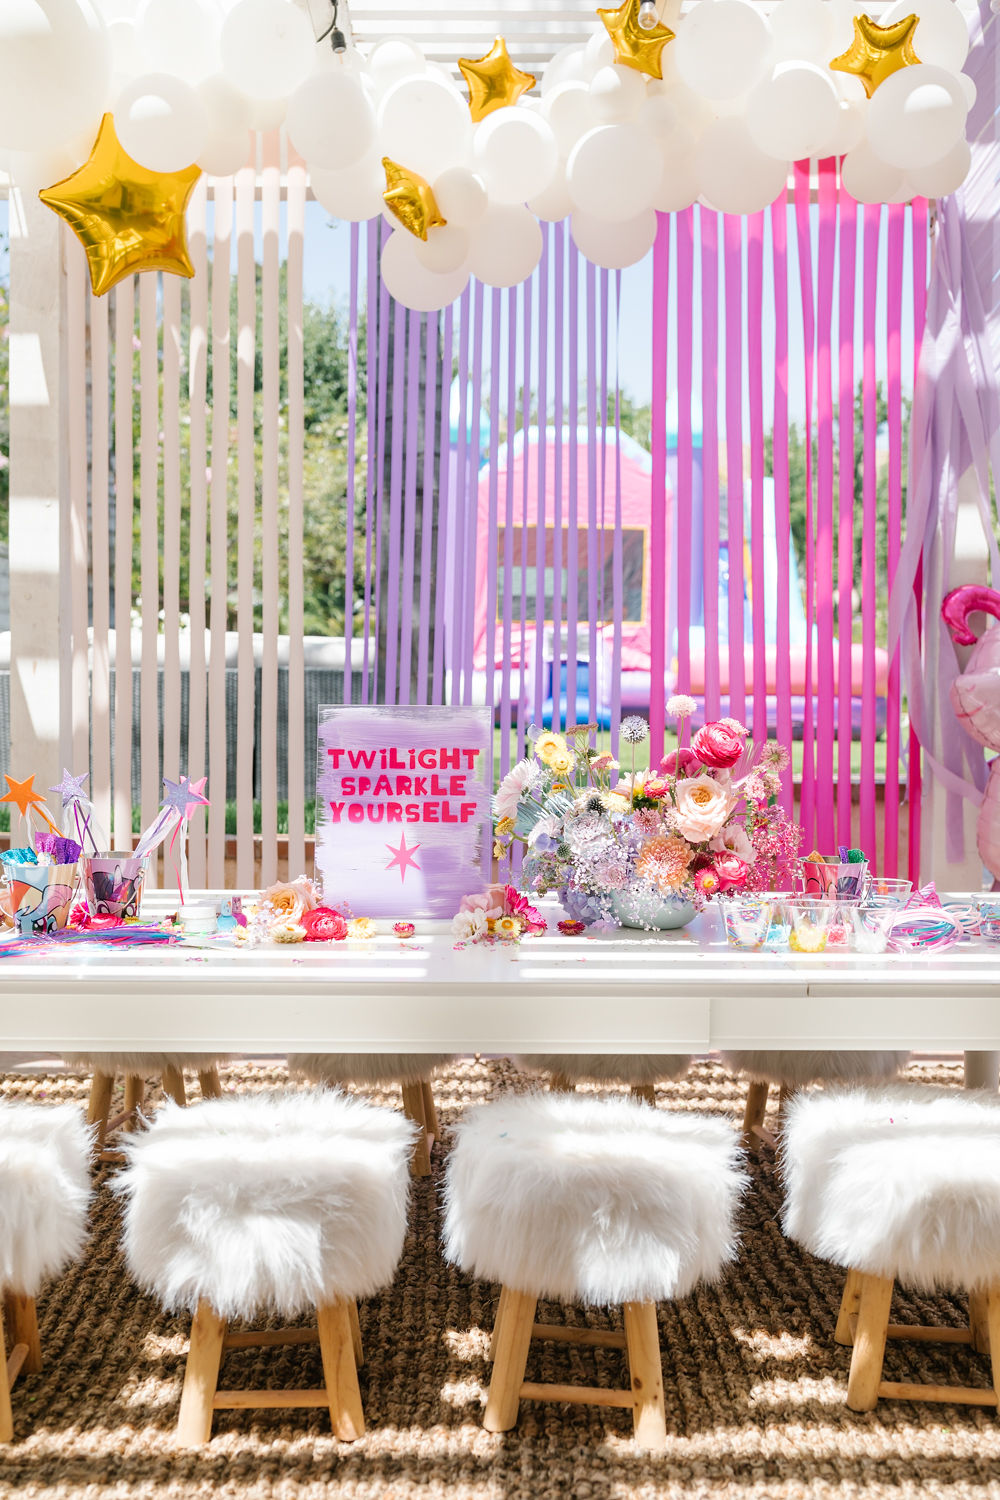 An outrageously cute My Little Pony themed 3rd birthday